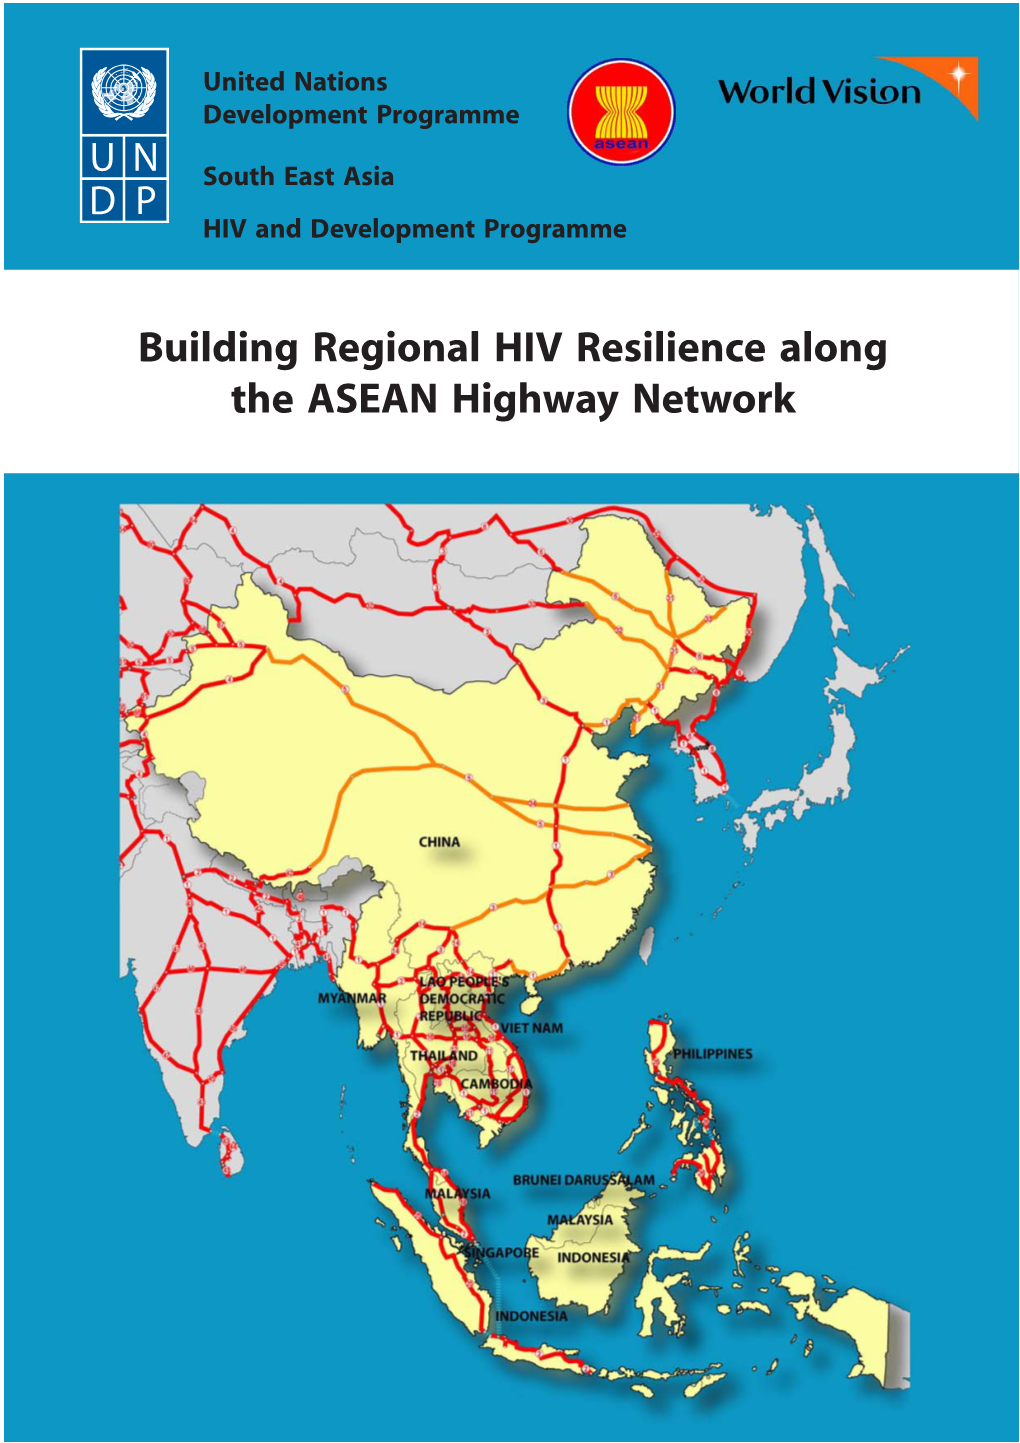 Building Regional HIV Resilience Along the ASEAN Highway Network